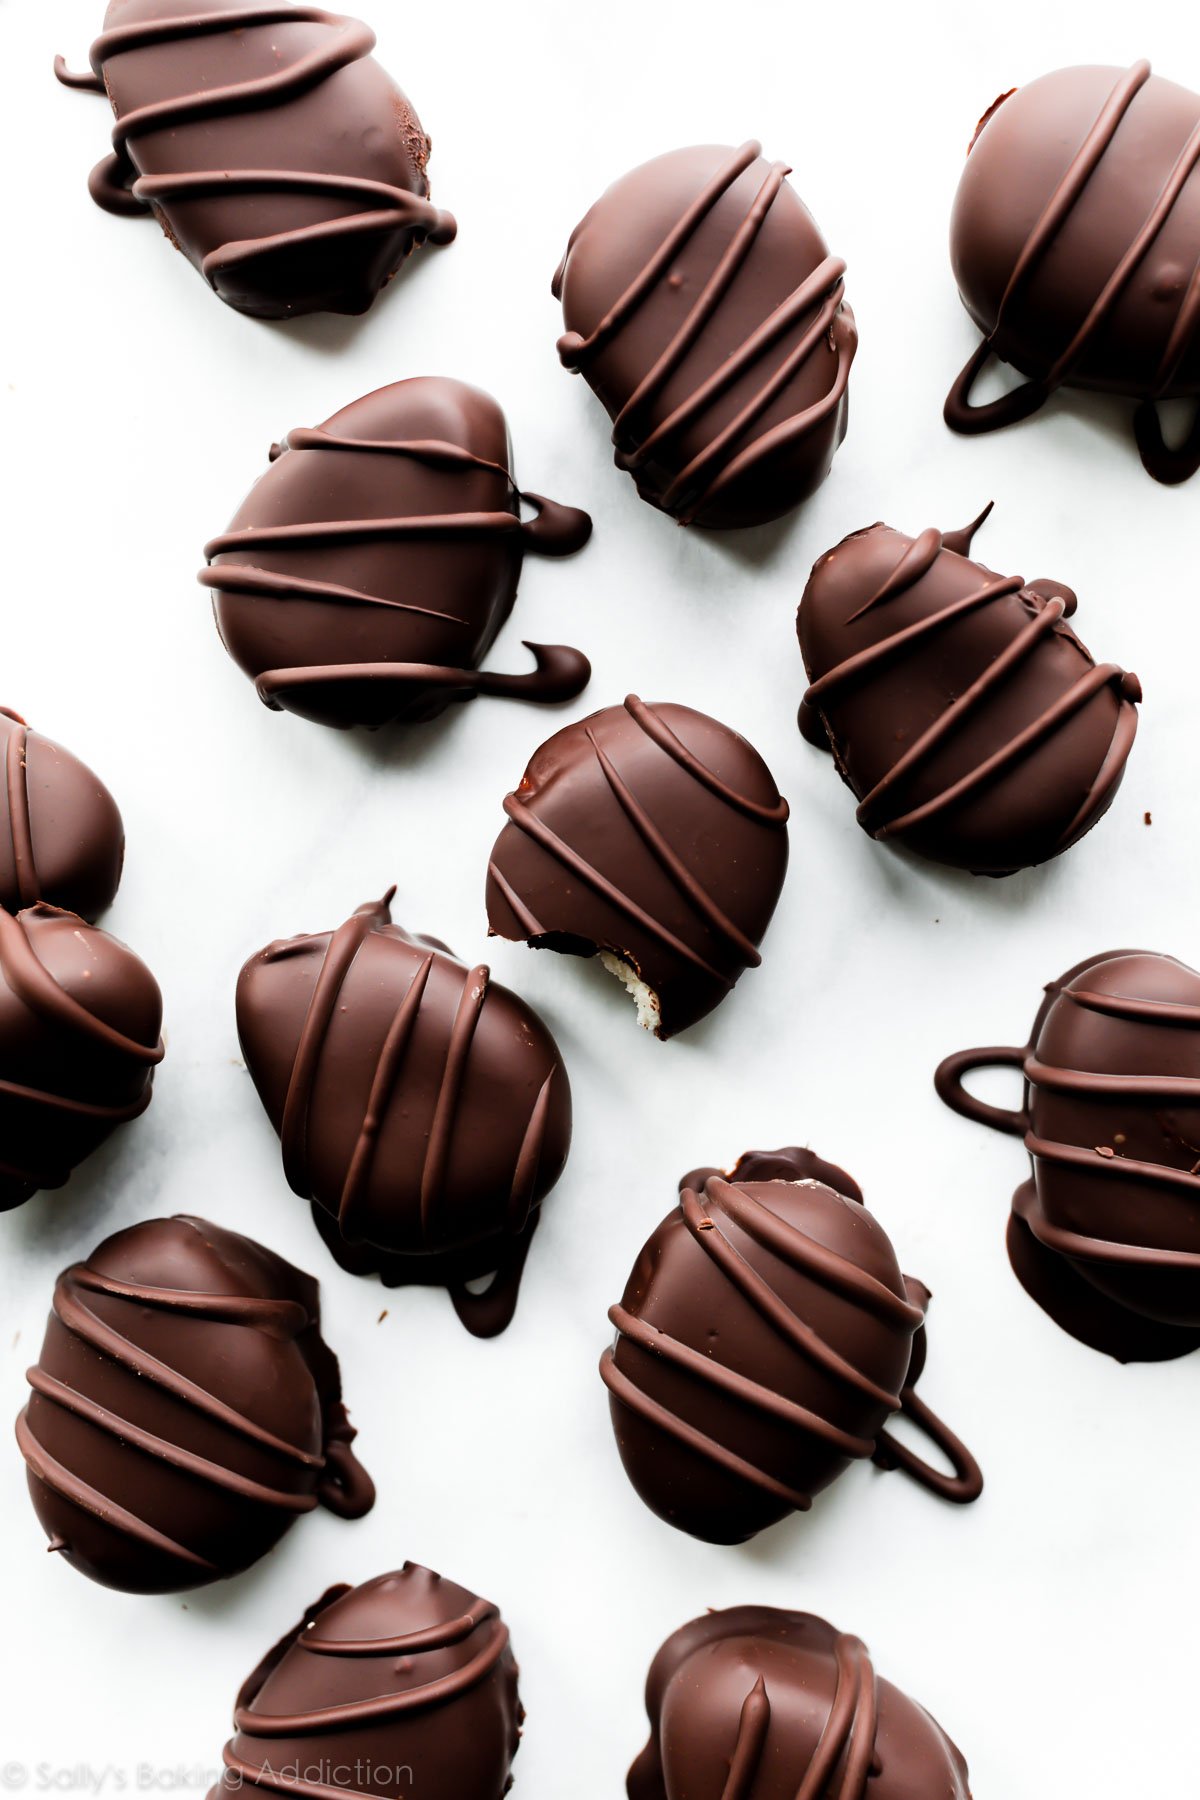 Chocolate covered buttercream Easter eggs